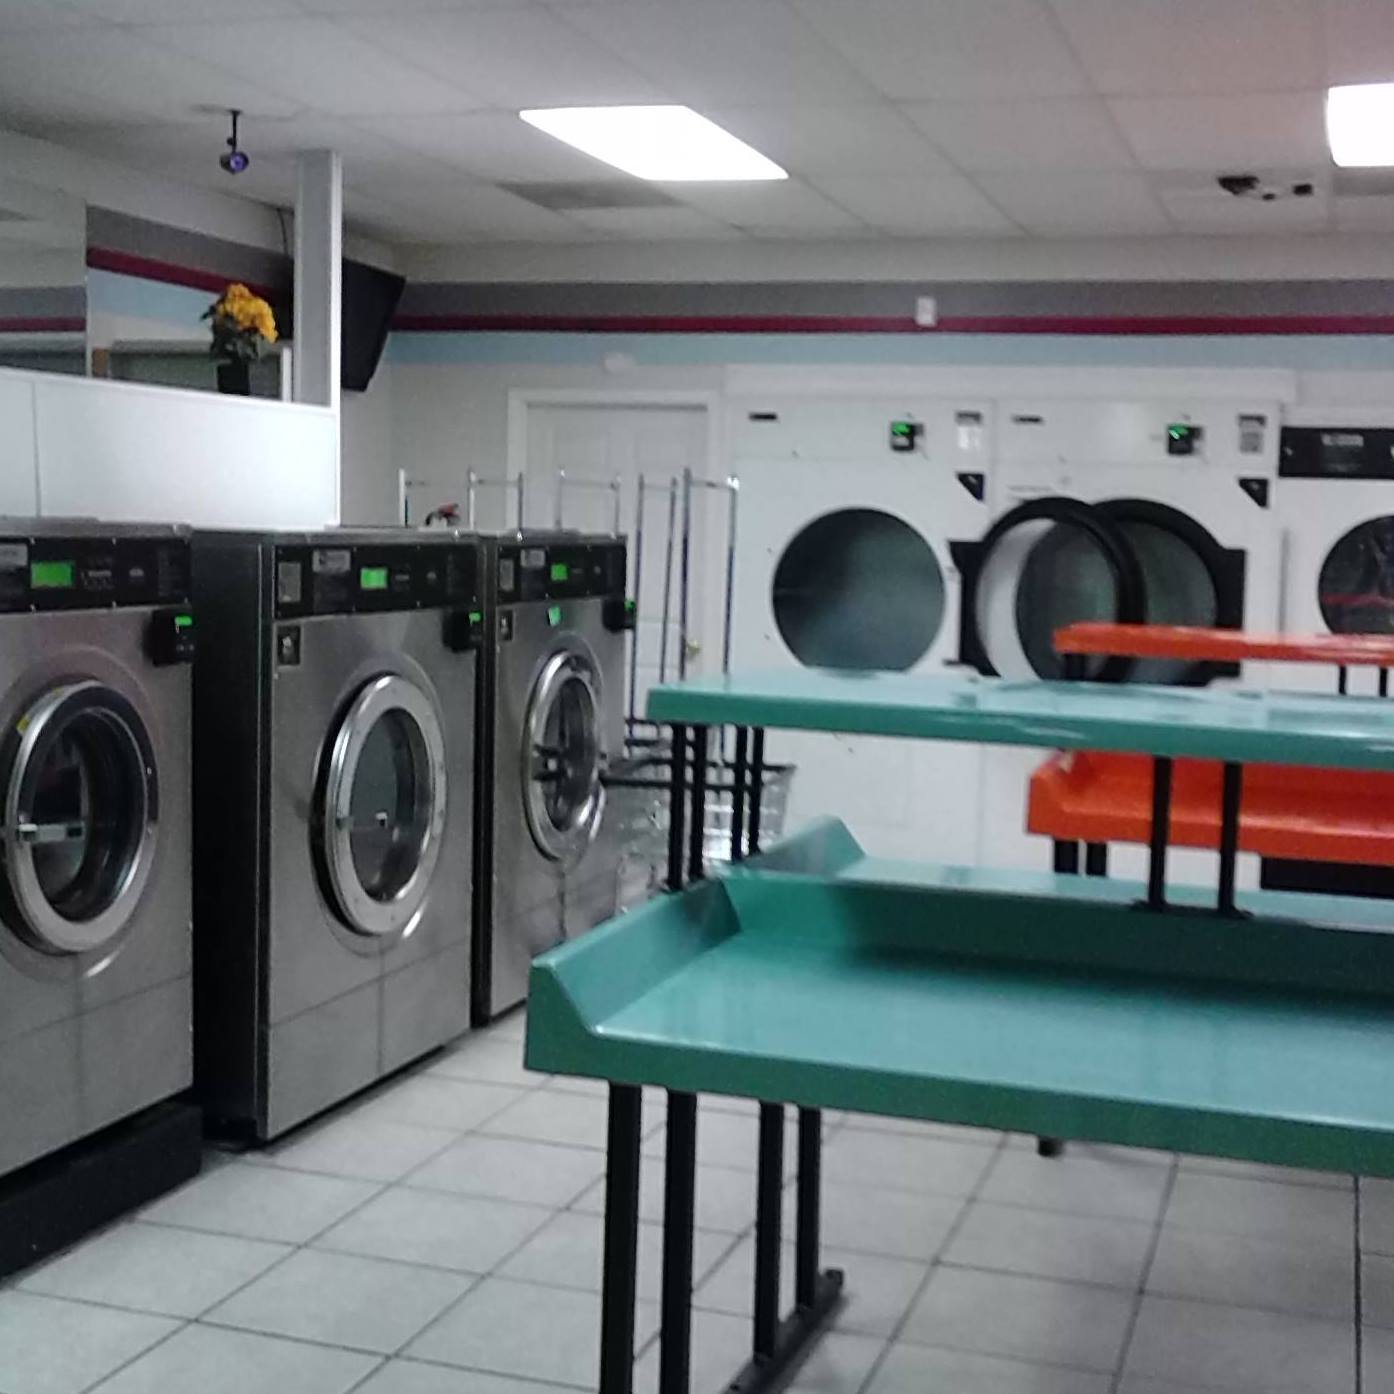 Spring Time Laundromat 520 Wilkes Dr # 11, Green River Wyoming 82935